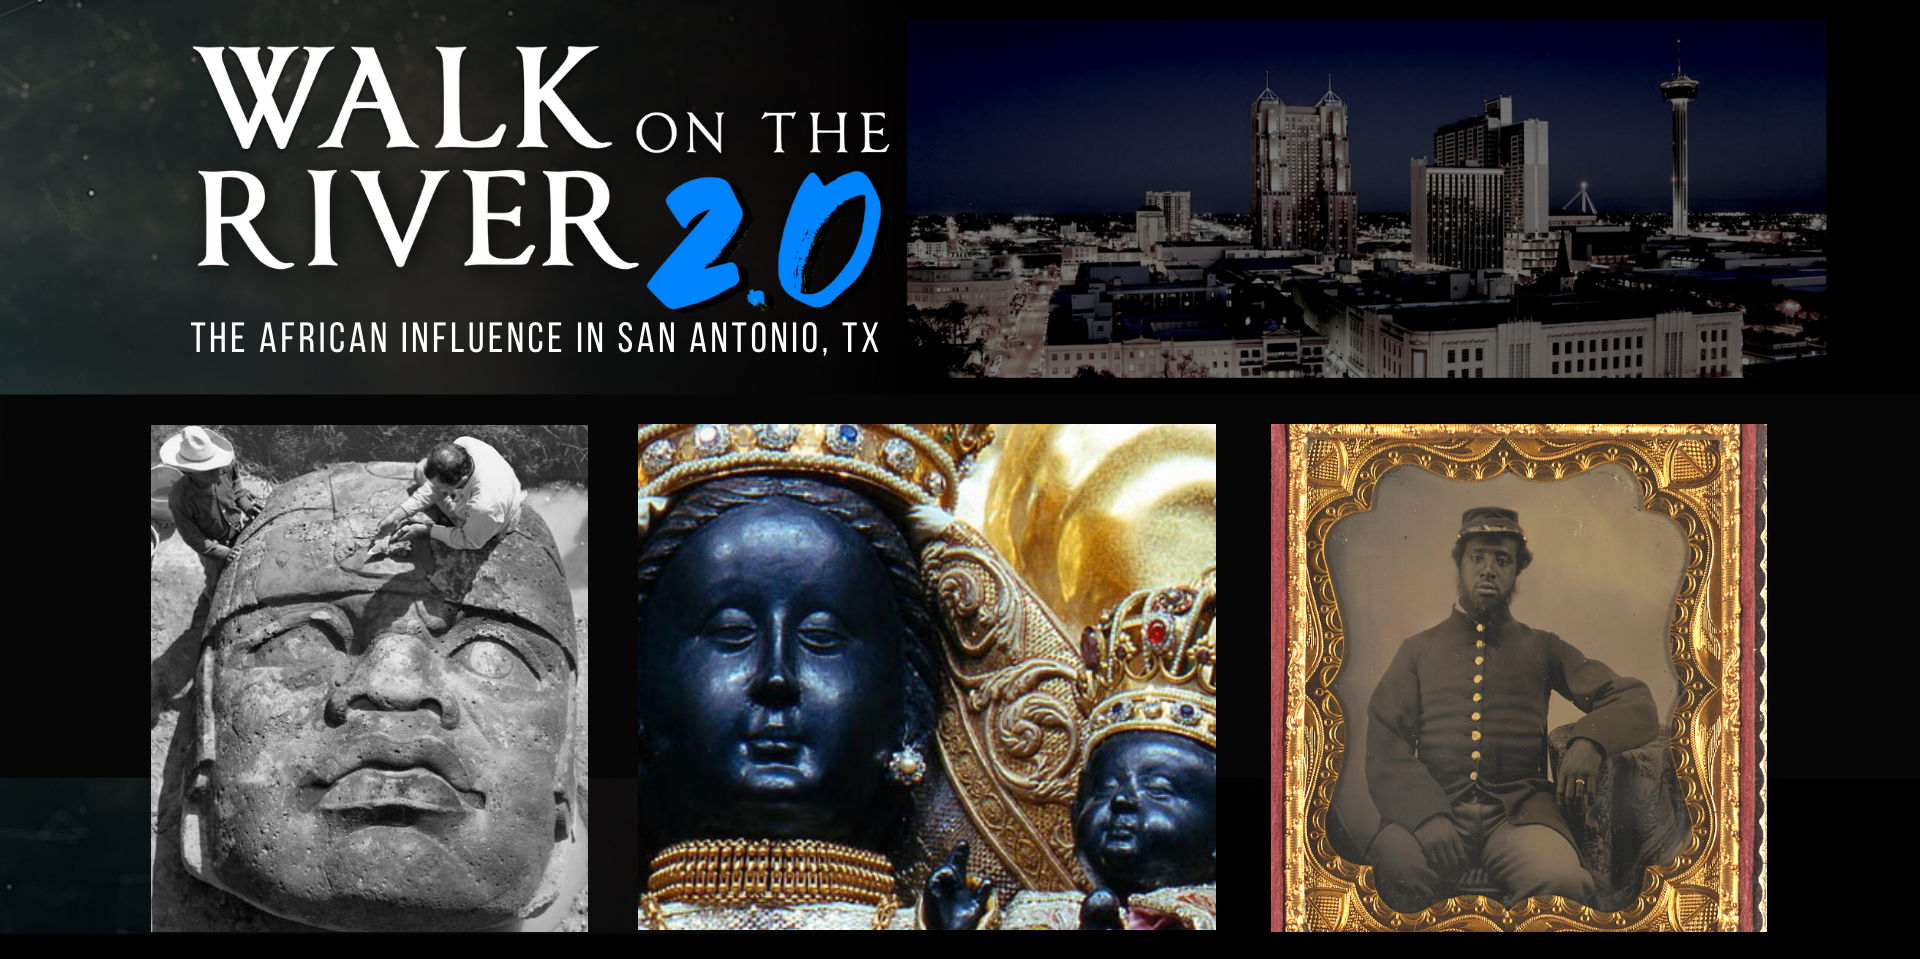 Walk on the River 2.0: The African Influence in SATX - Film Screening promotional image